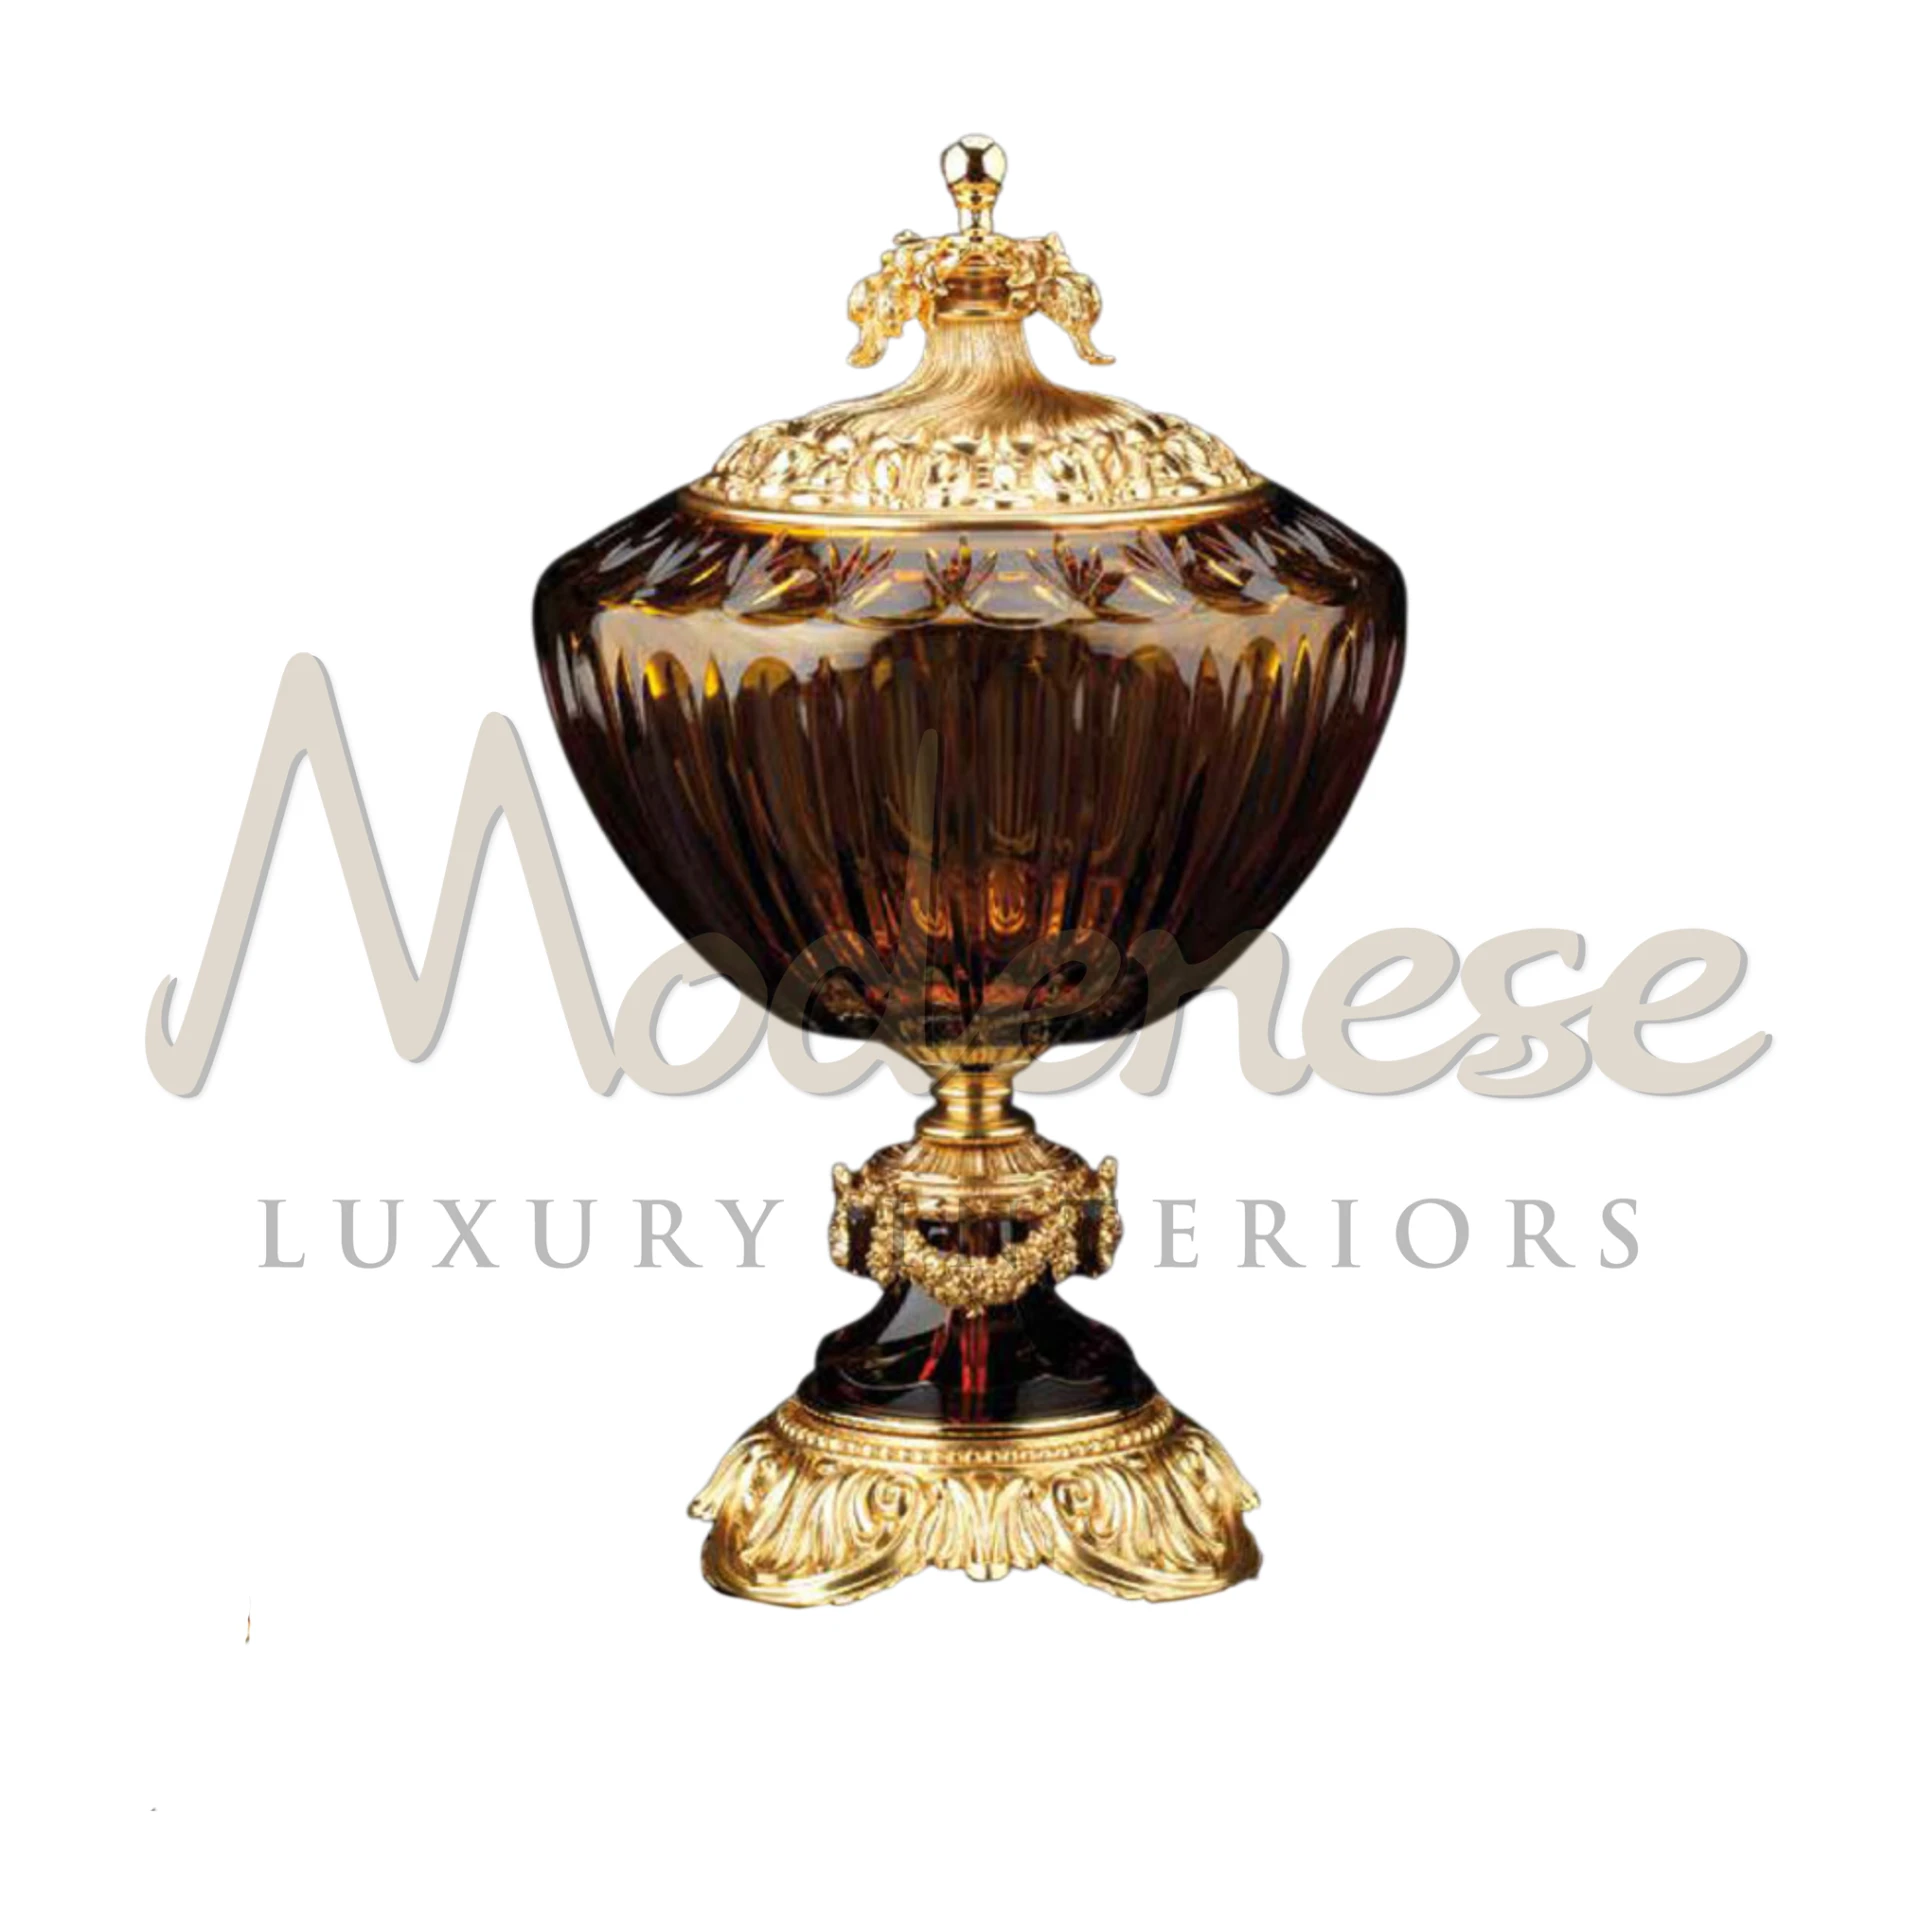 Elegant Victorian glass closed bowl with domed lid, a Modenese Furniture piece, adds sophistication to luxury interiors.







